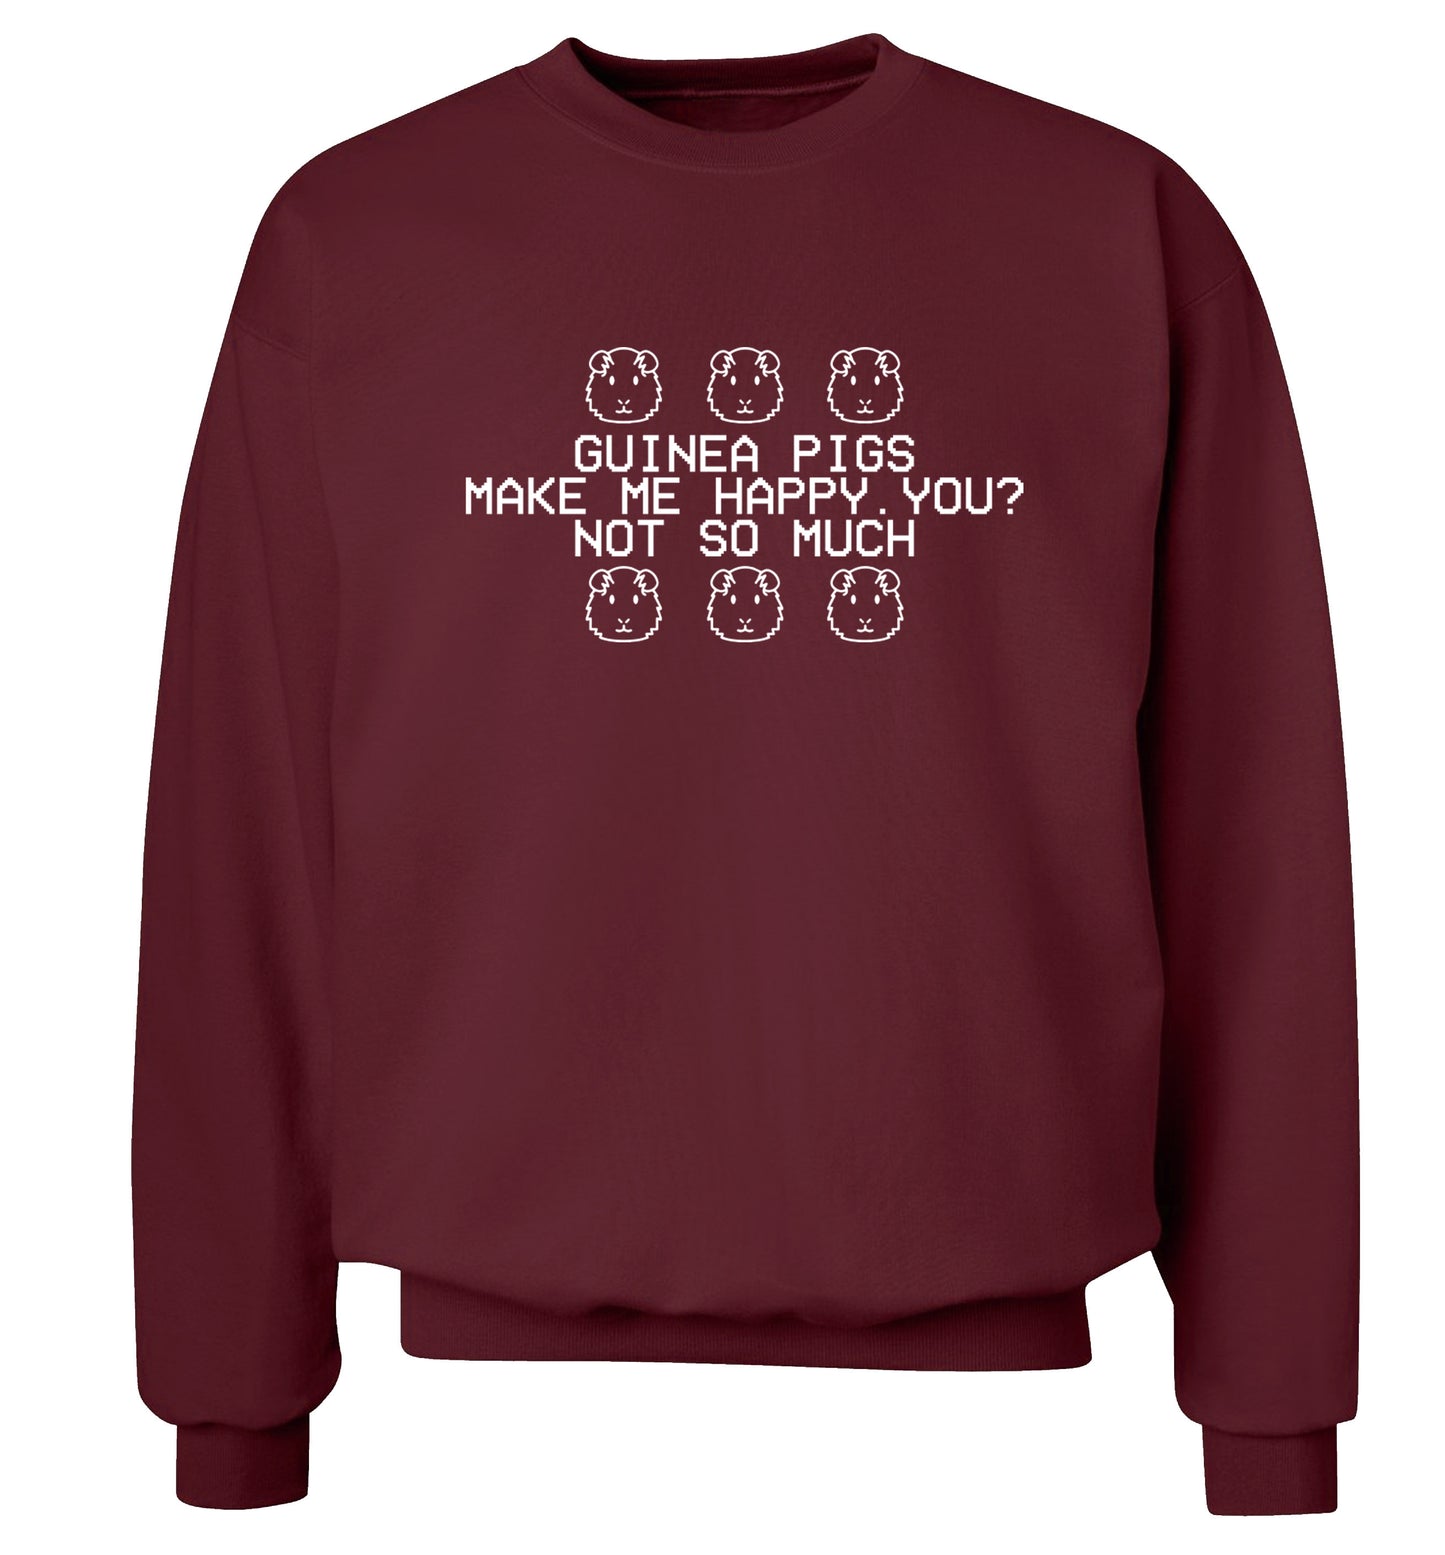 Guinea pigs make me happy, you not so much Adult's unisex maroon  sweater 2XL